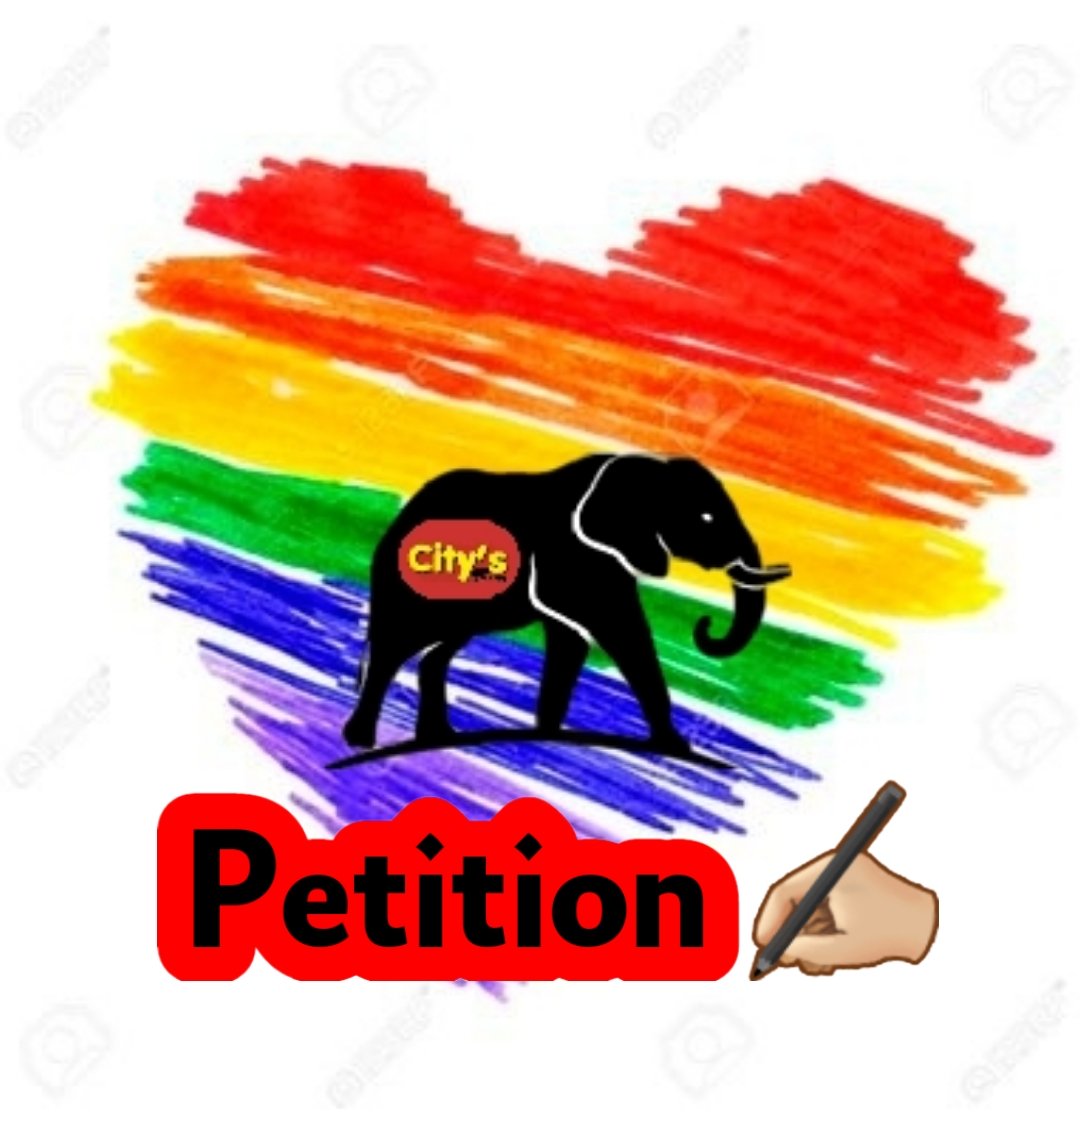 We are so many elephant friends on Twitter and together we should be able to get this PETITION to 200,000
🙏🏻ONLY 263 are missing ✍🏼 
If everyone retweets it's done.  Thank you 
#FreeShankar
#FreeShankarDehliZoo ⛓🐘⛓
@youthforanimals
@dhawan_niki

⬇️✍🏼↙️
change.org/p/freeshankard…